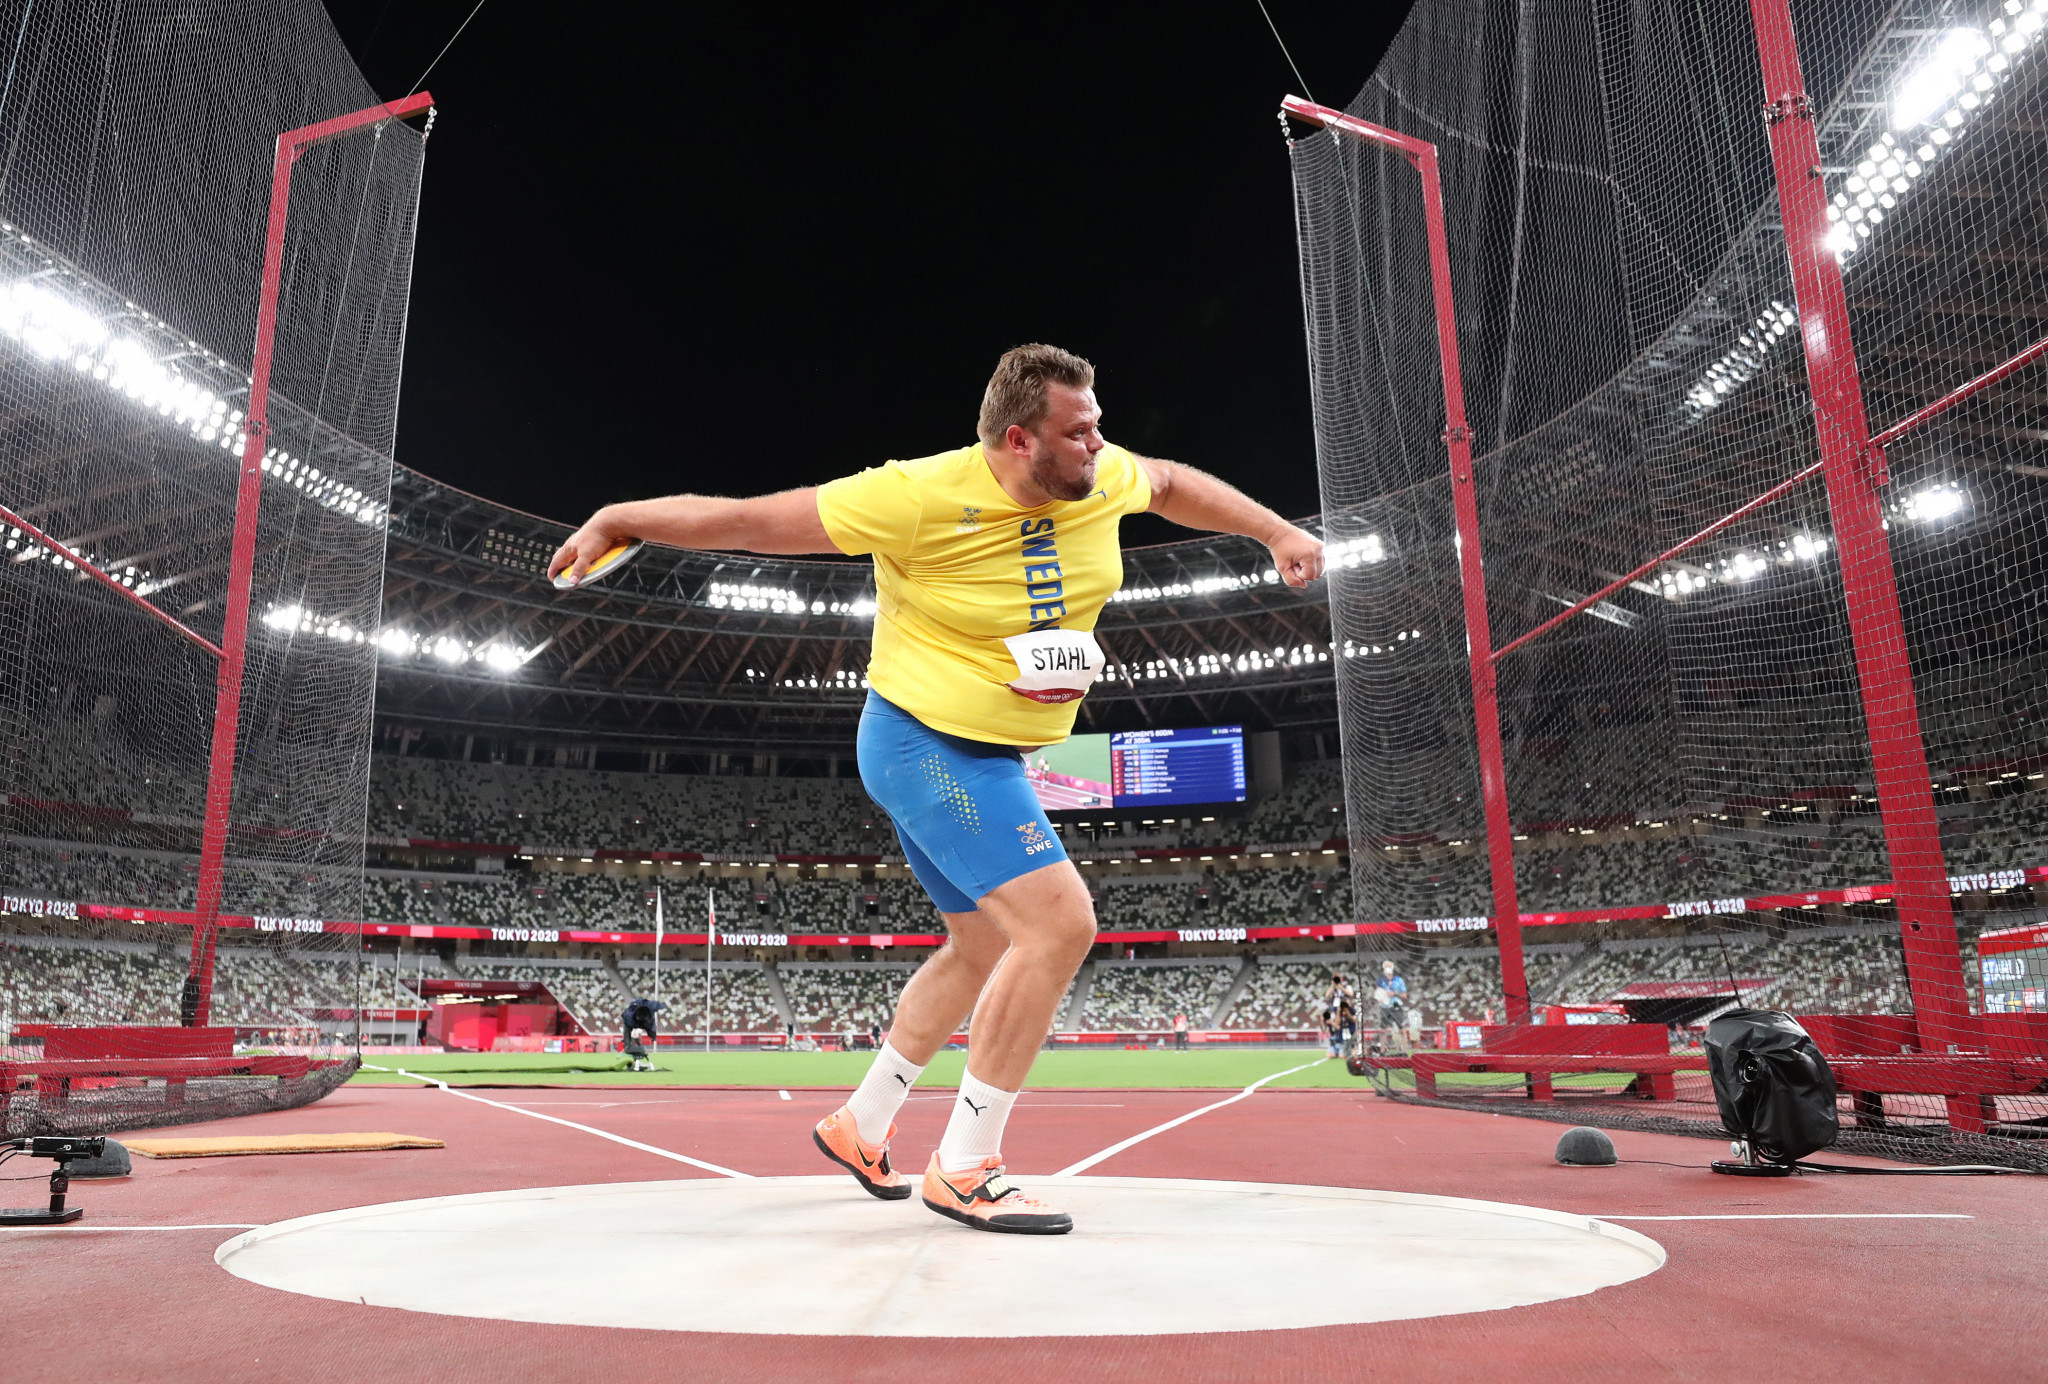 Daniel Ståhl of Sweden threw a world-leading 71.40m in the discus, but failed to make the final five for Male World Athlete of the Year ©Getty Images